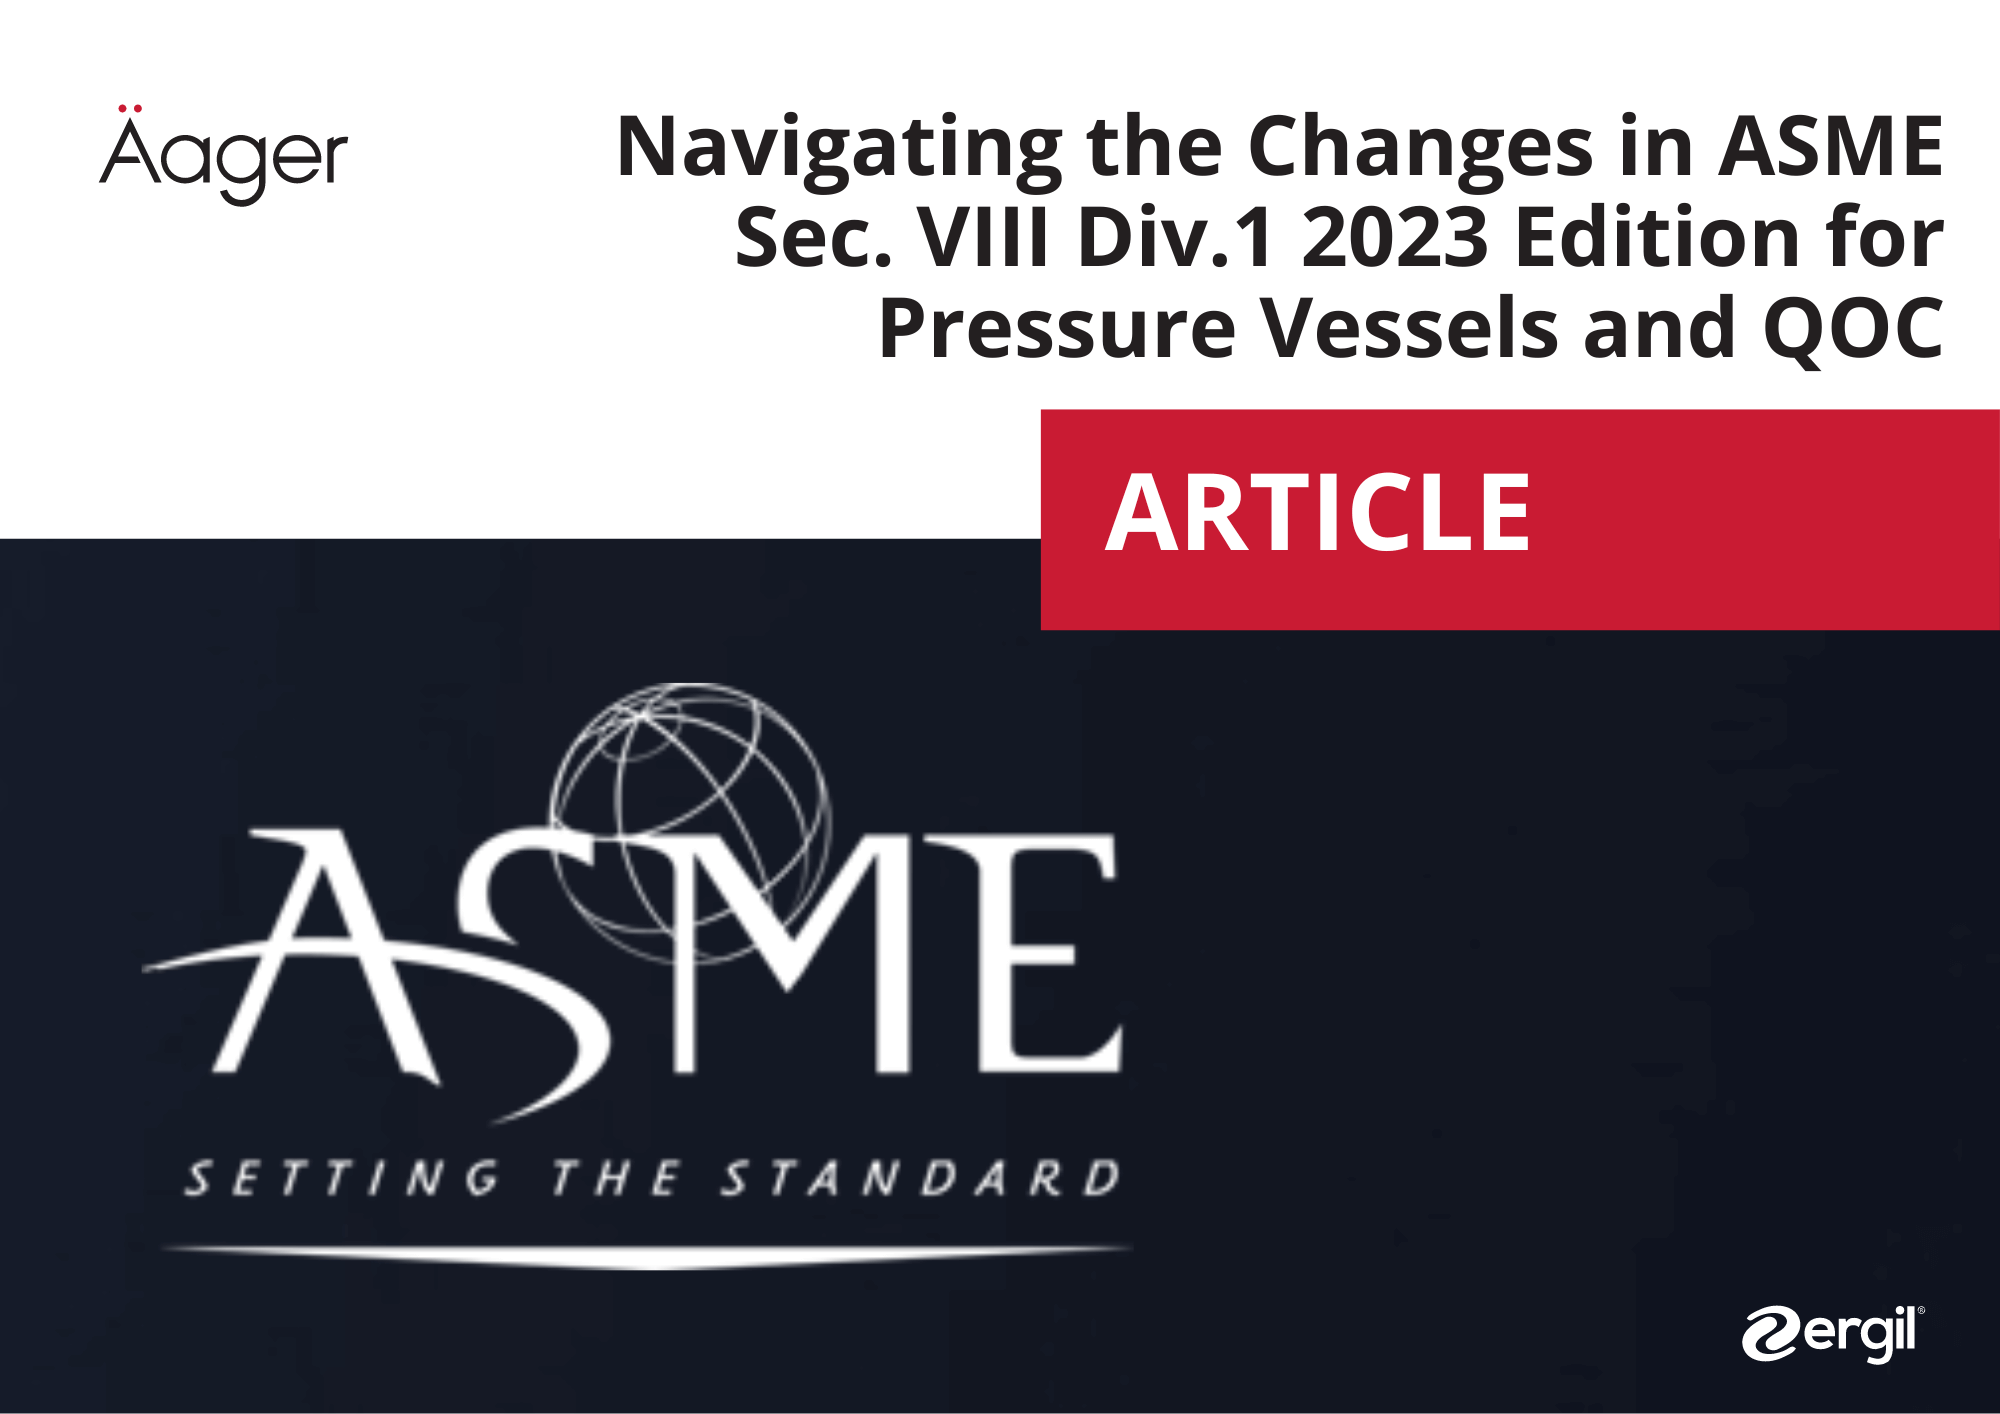 Navigating the Changes in ASME Sec. VIII Div.1 2023 Edition for Pressure Vessels and QOC 33